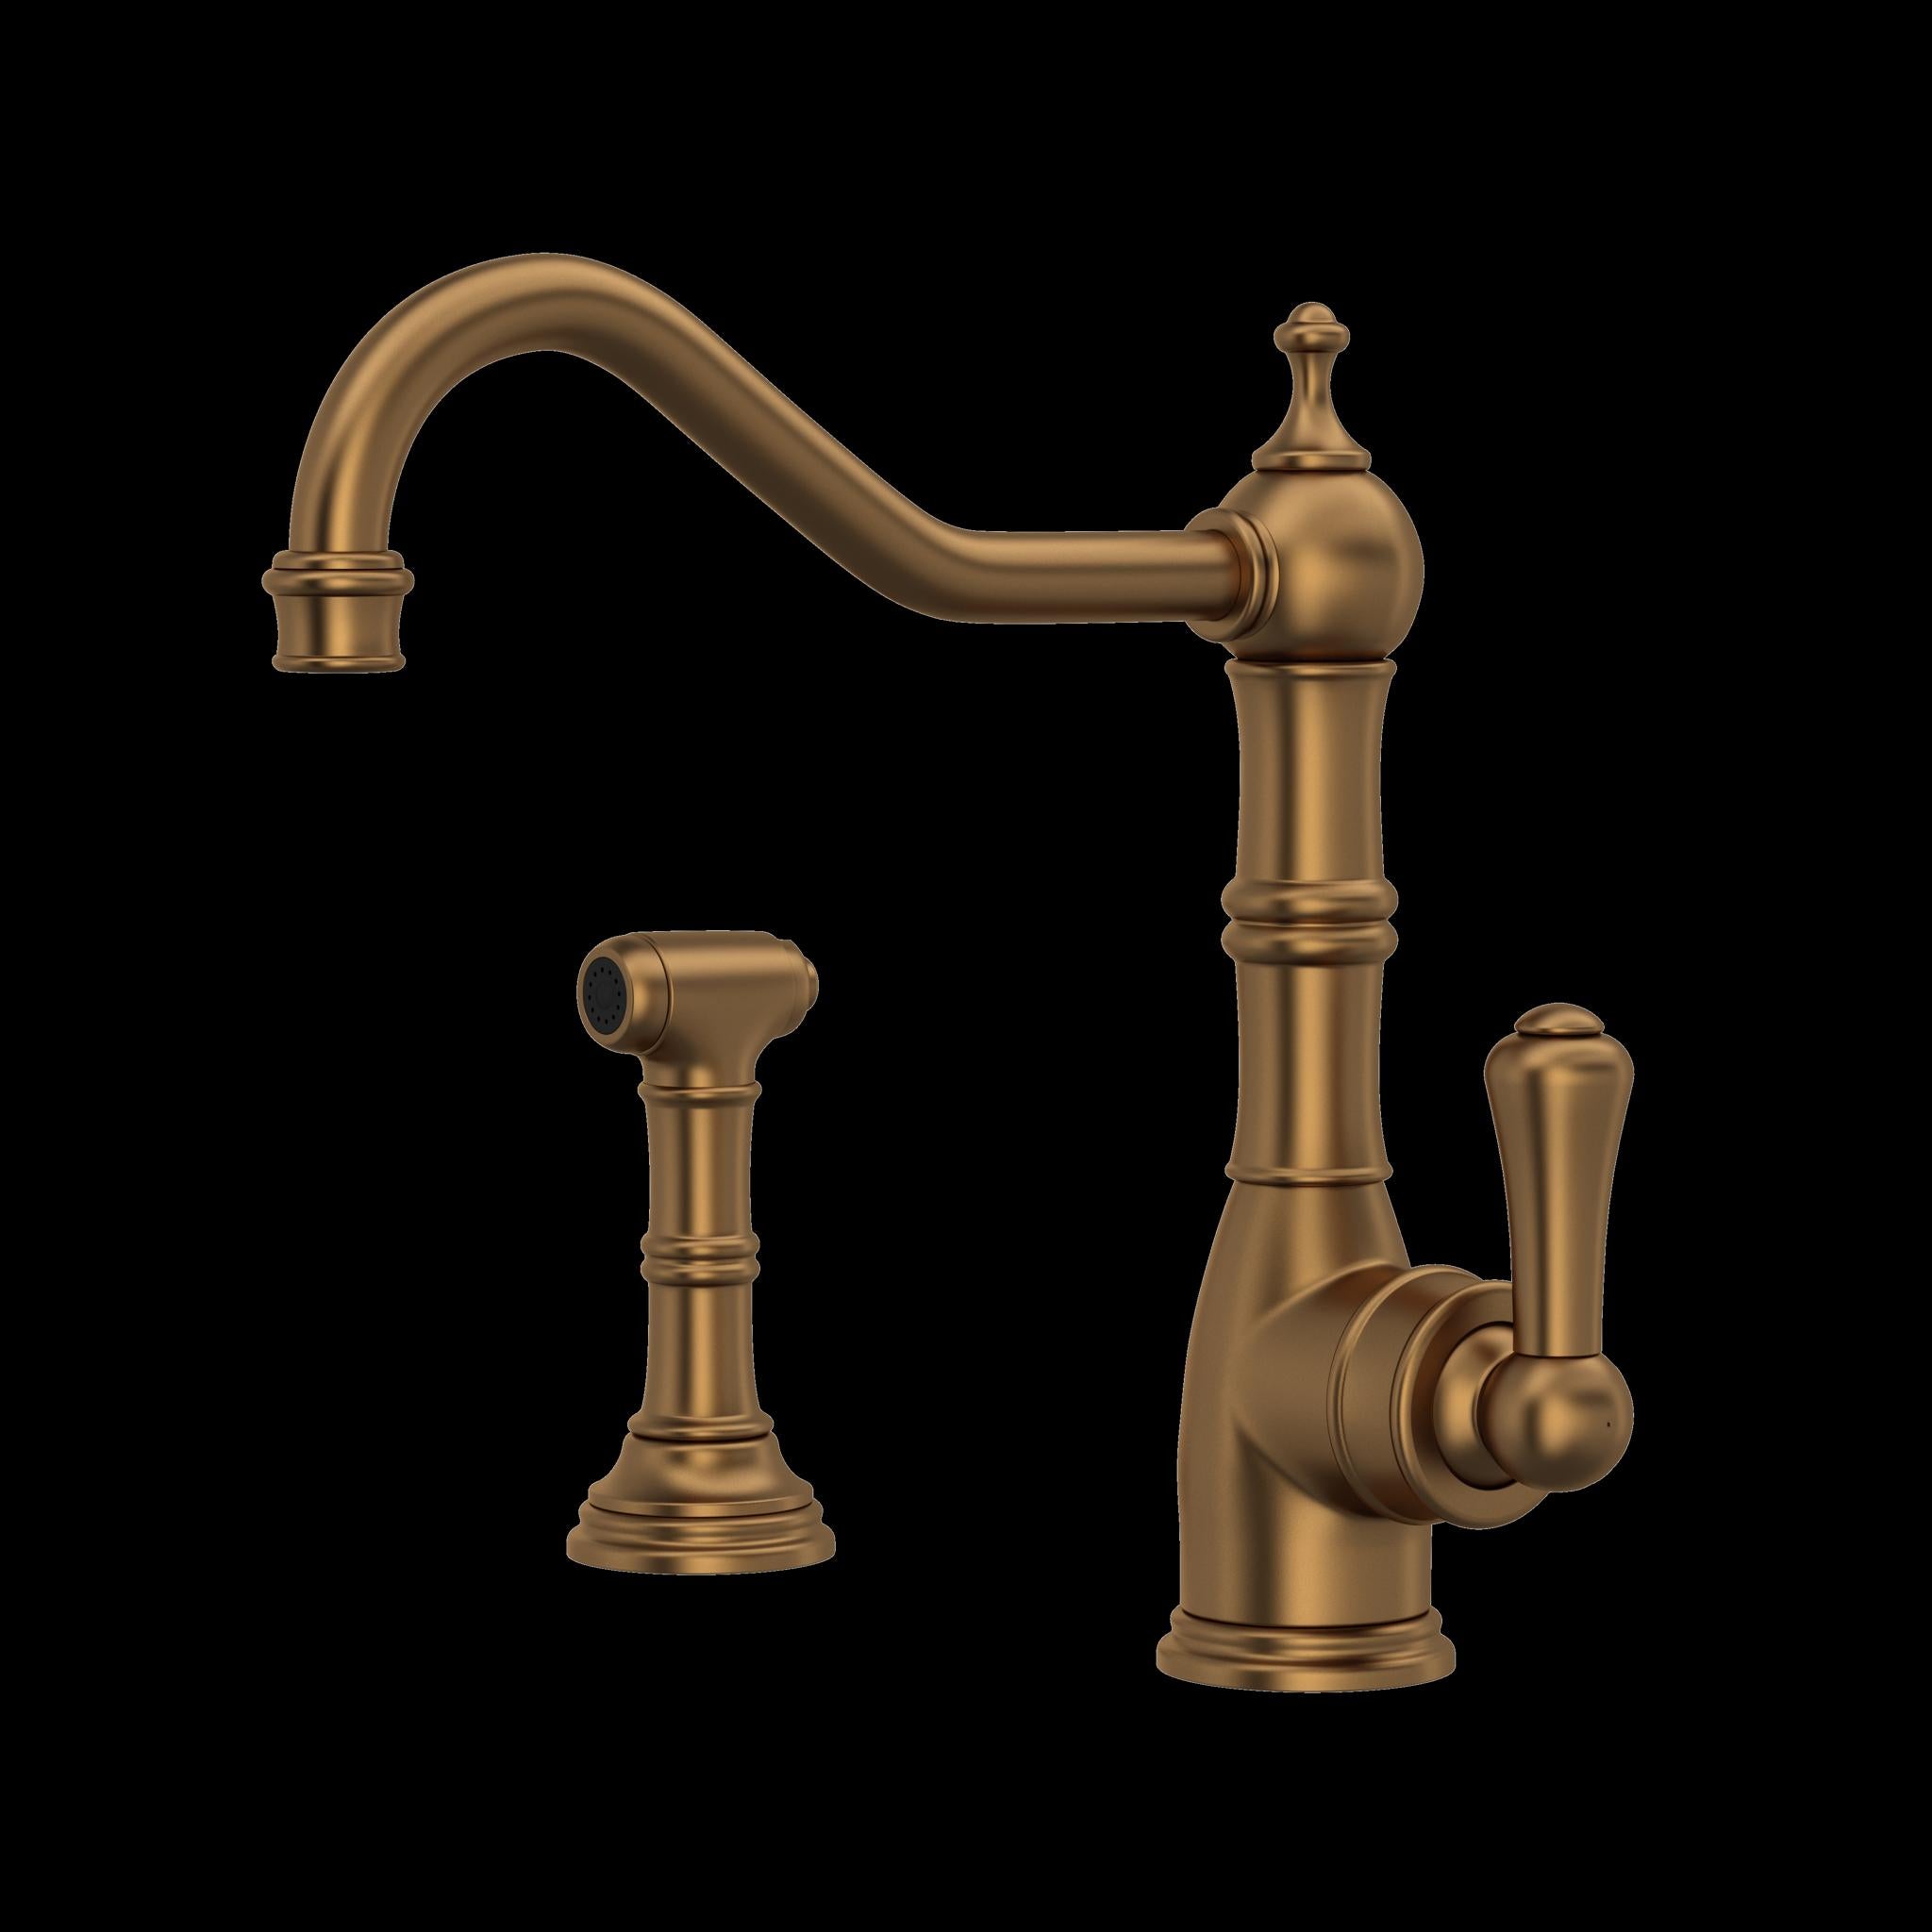 Perrin & Rowe U.4746 Edwardian Kitchen Faucet With Side Spray